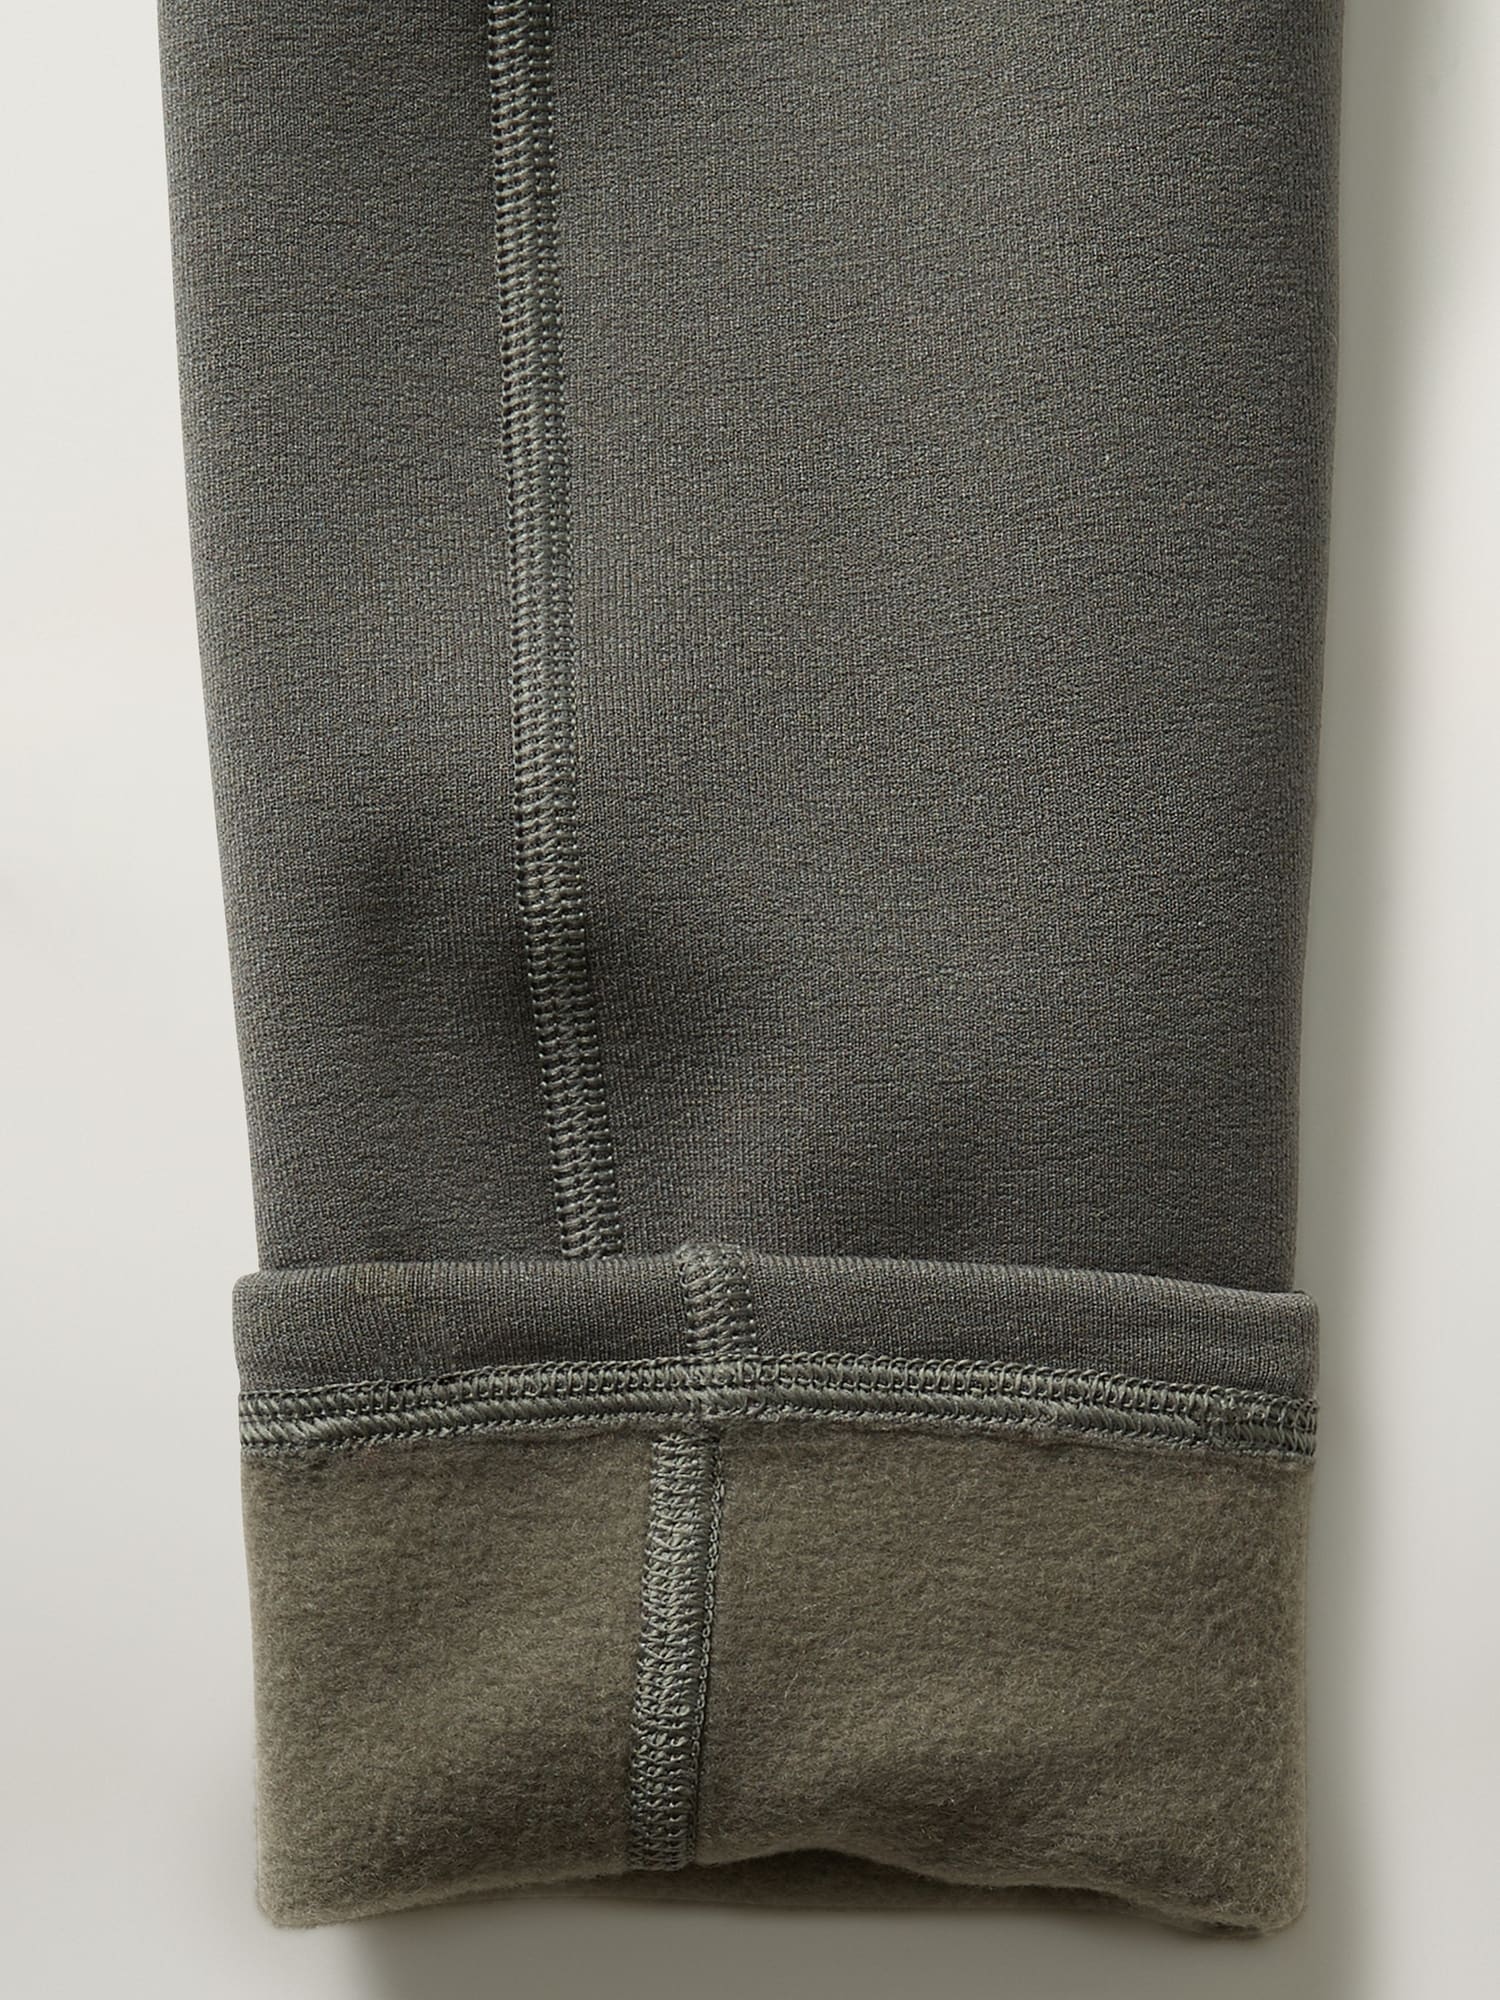 Athleta S Altitude Polartec Power Stretch Thermal Pant Small Hematite Gray  - $70 New With Tags - From Rob